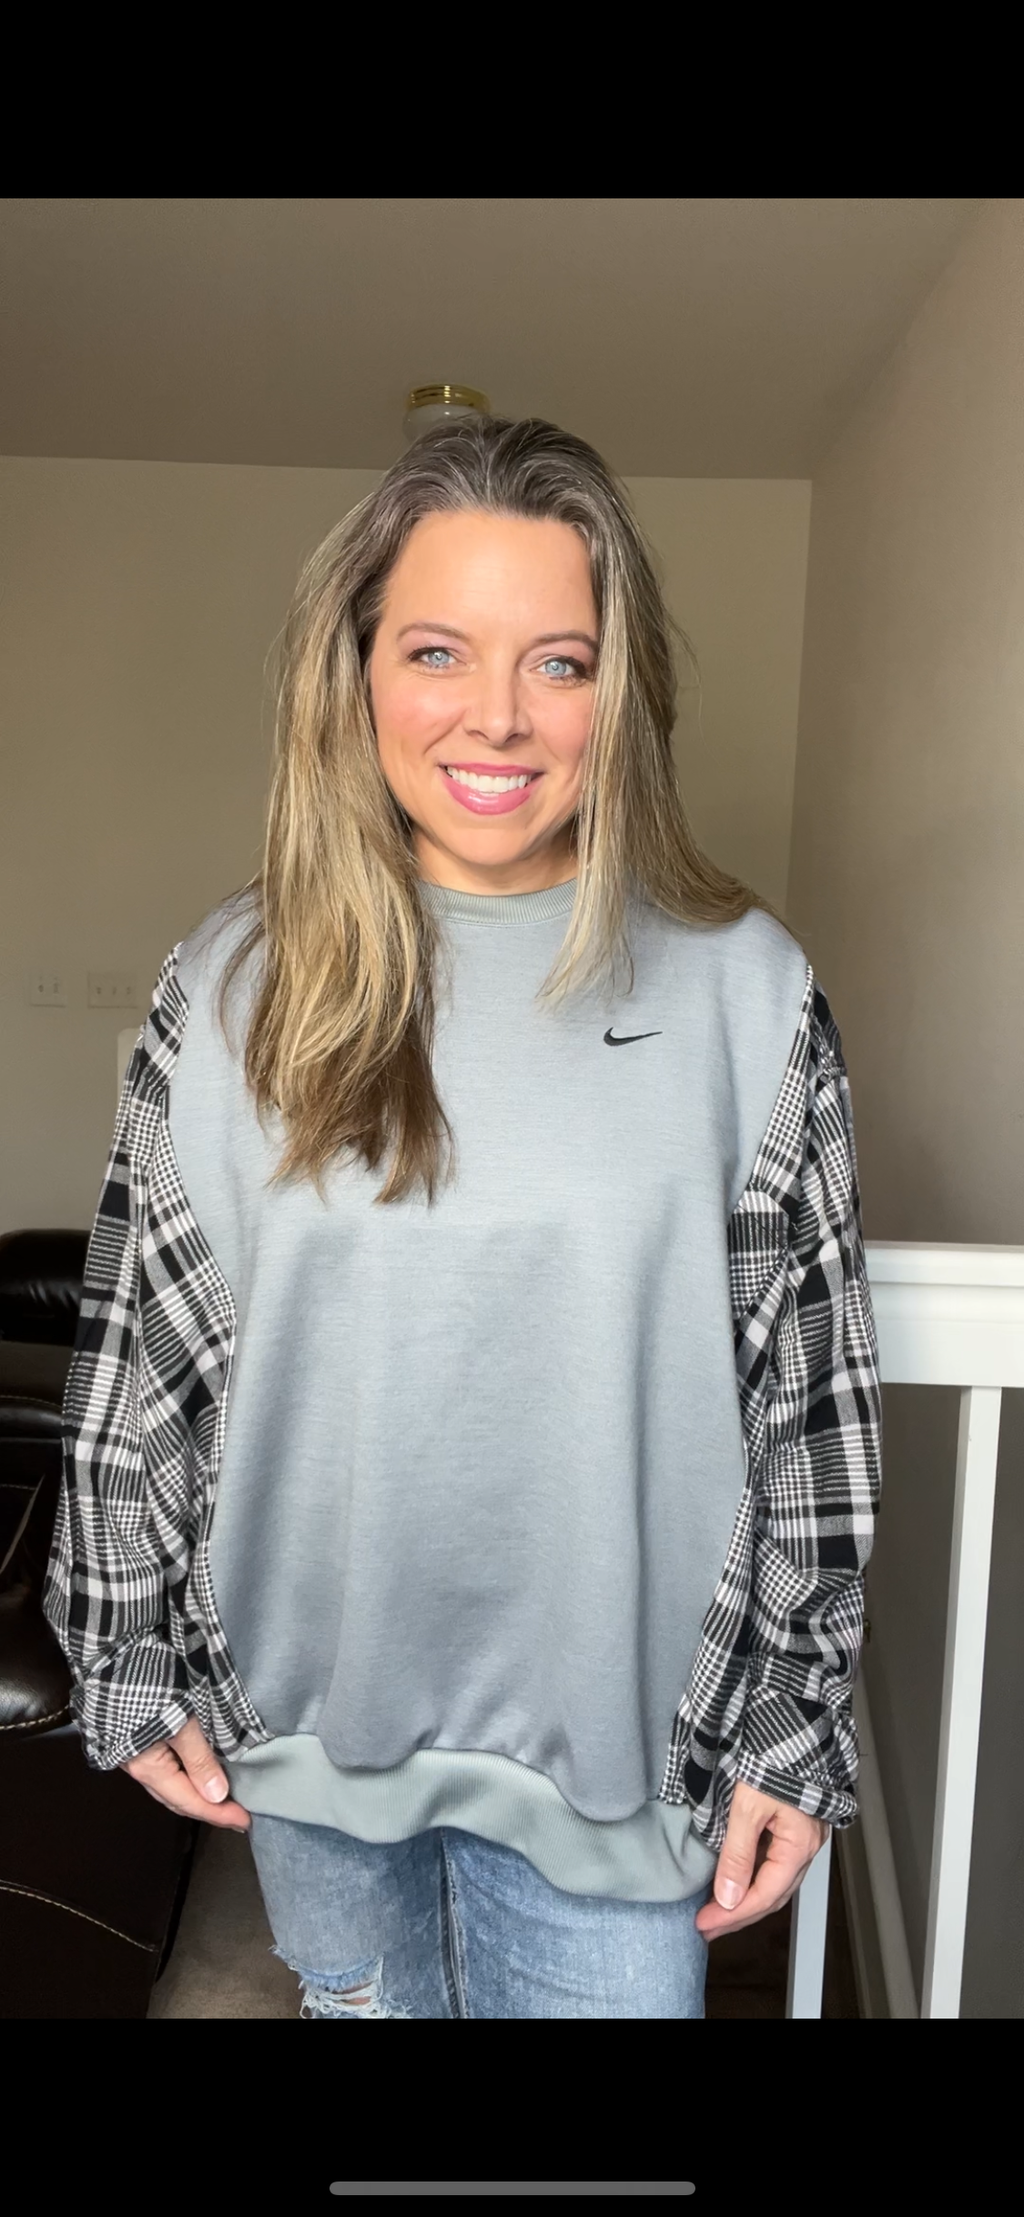 Upcycled Silver Nike – women’s XL – midweight sweatshirt with flannel sleeves ￼